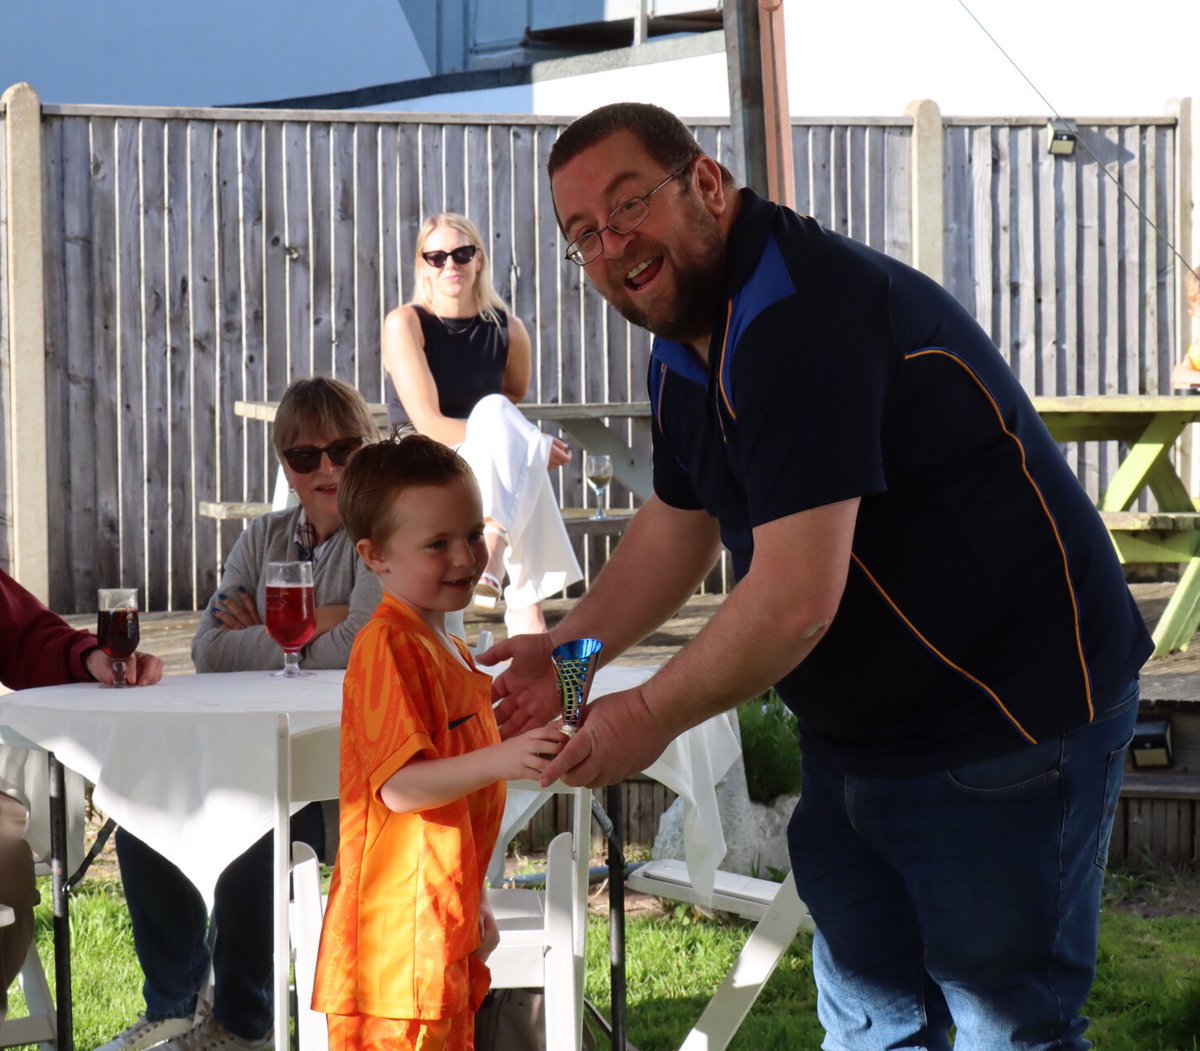 One last award for you! Young Supporter of the Season - Linden Stuart